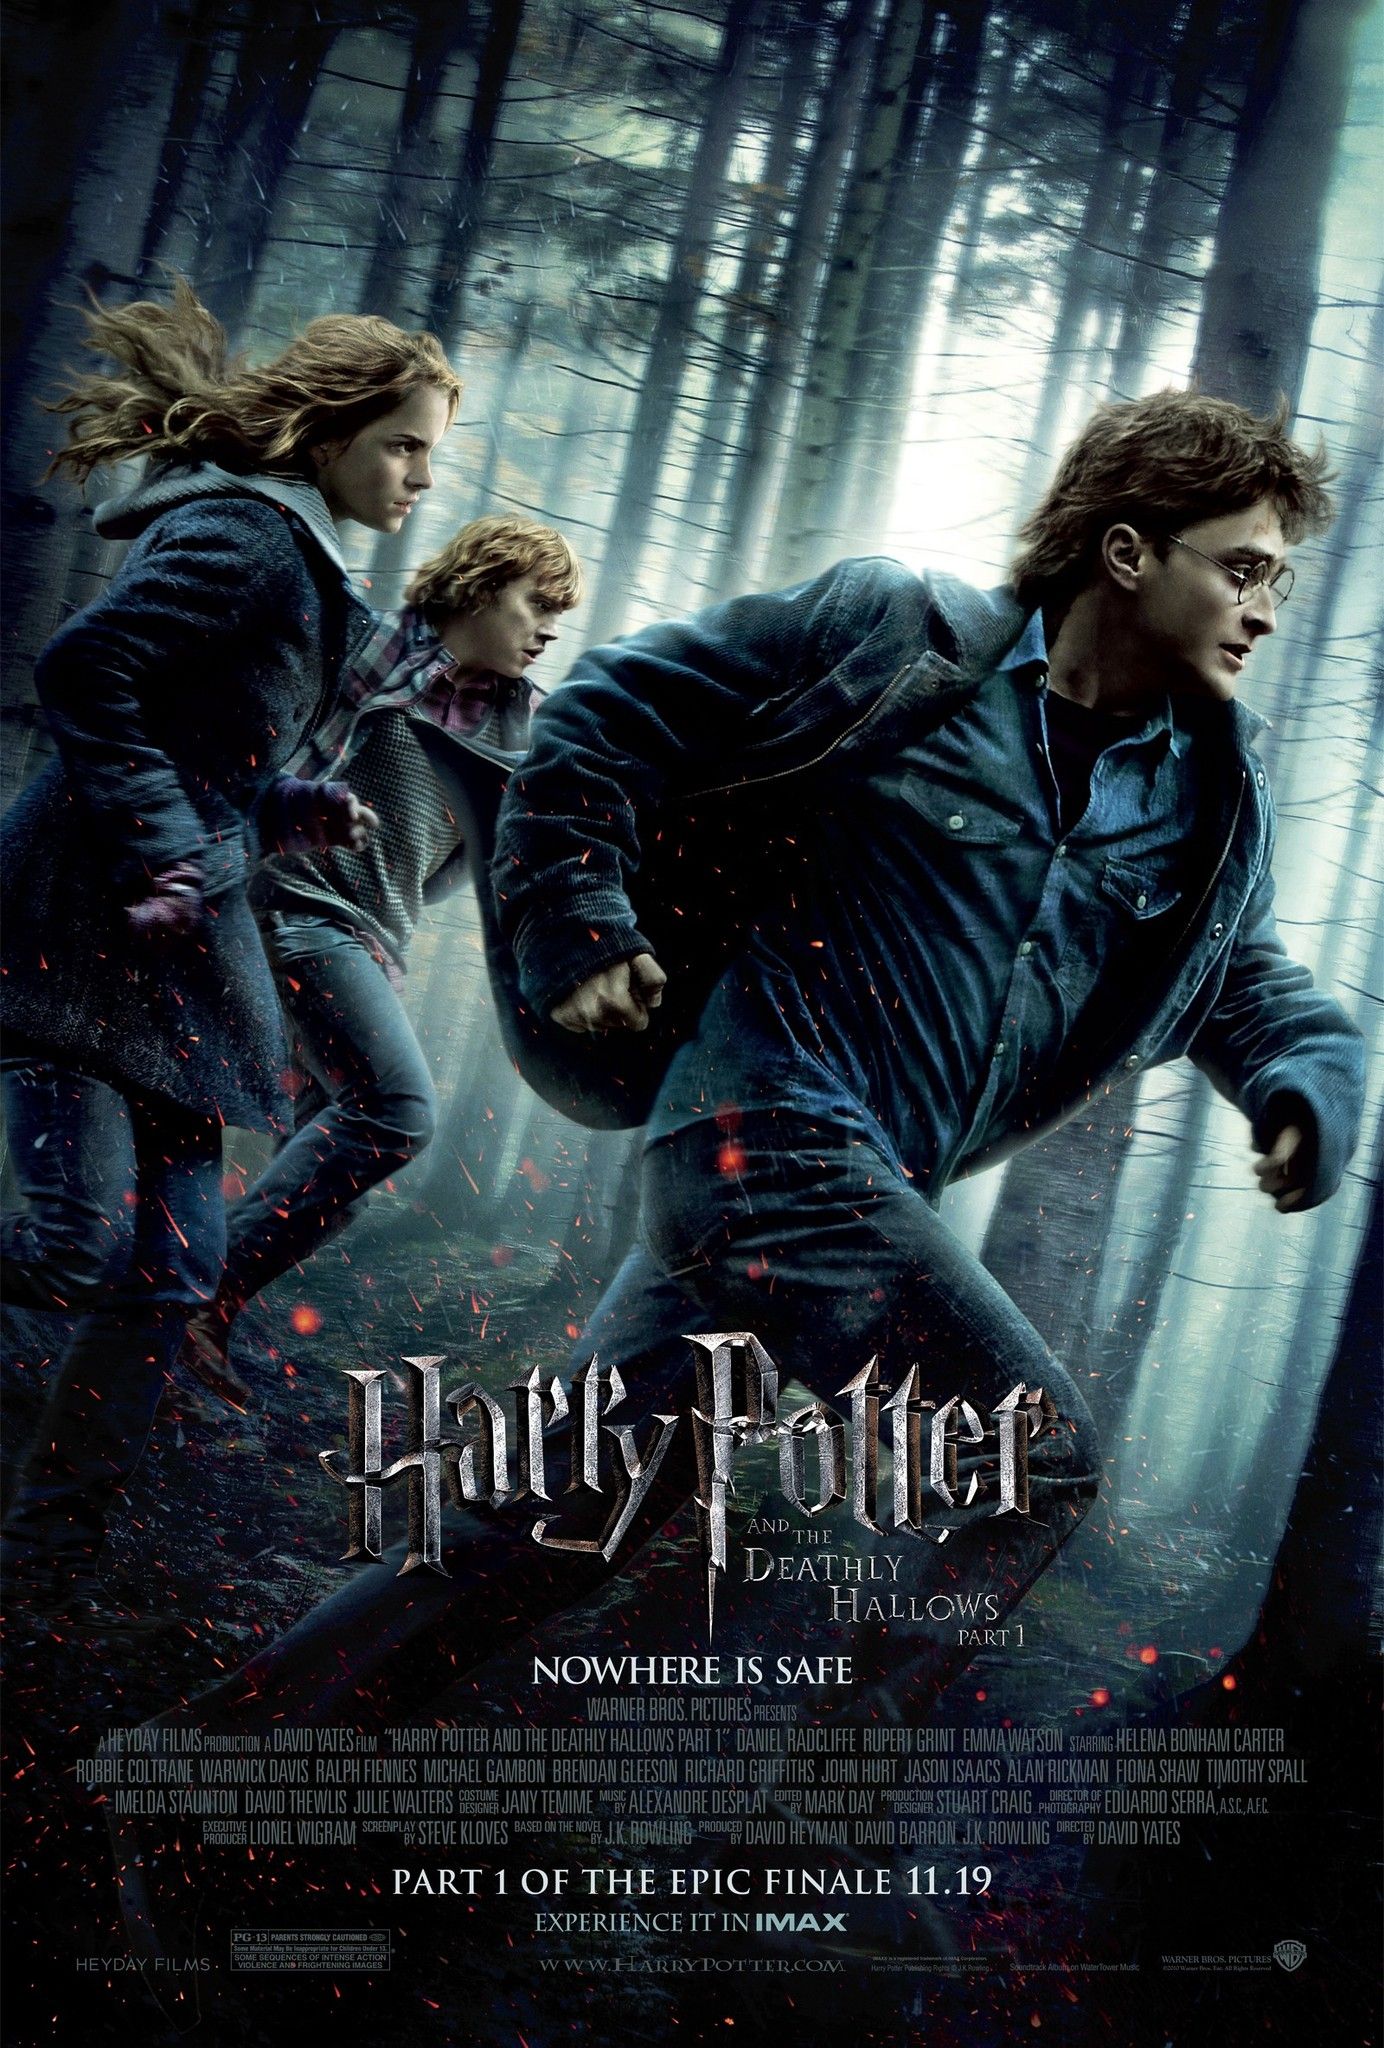 Harry Potter And The Deathly Hallows Part 1 Film Poster